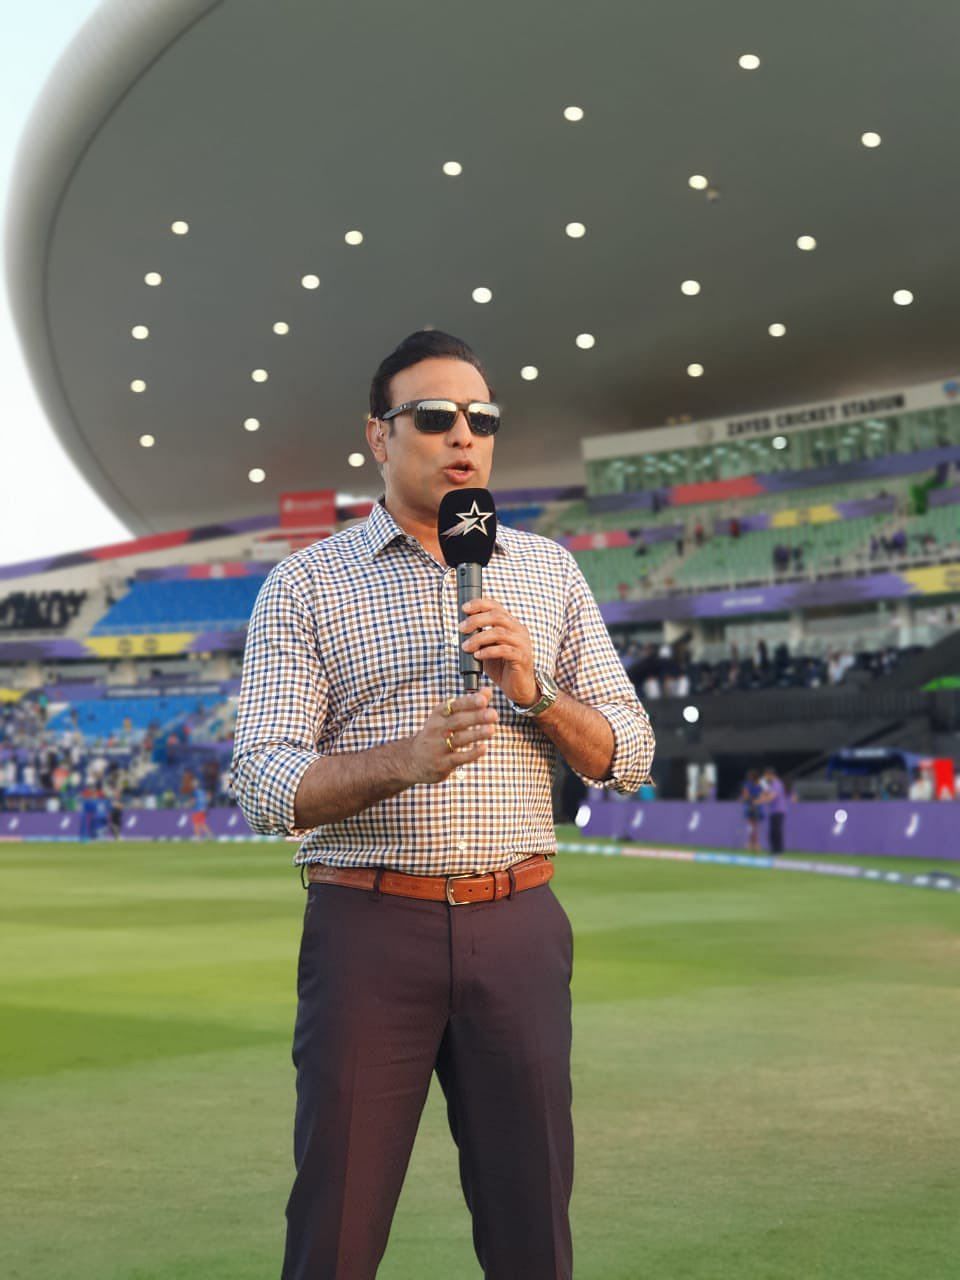 VVS Laxman thinks India need to identify a template ahead of next World Cup (Credit: VVS Laxman/Twitter)